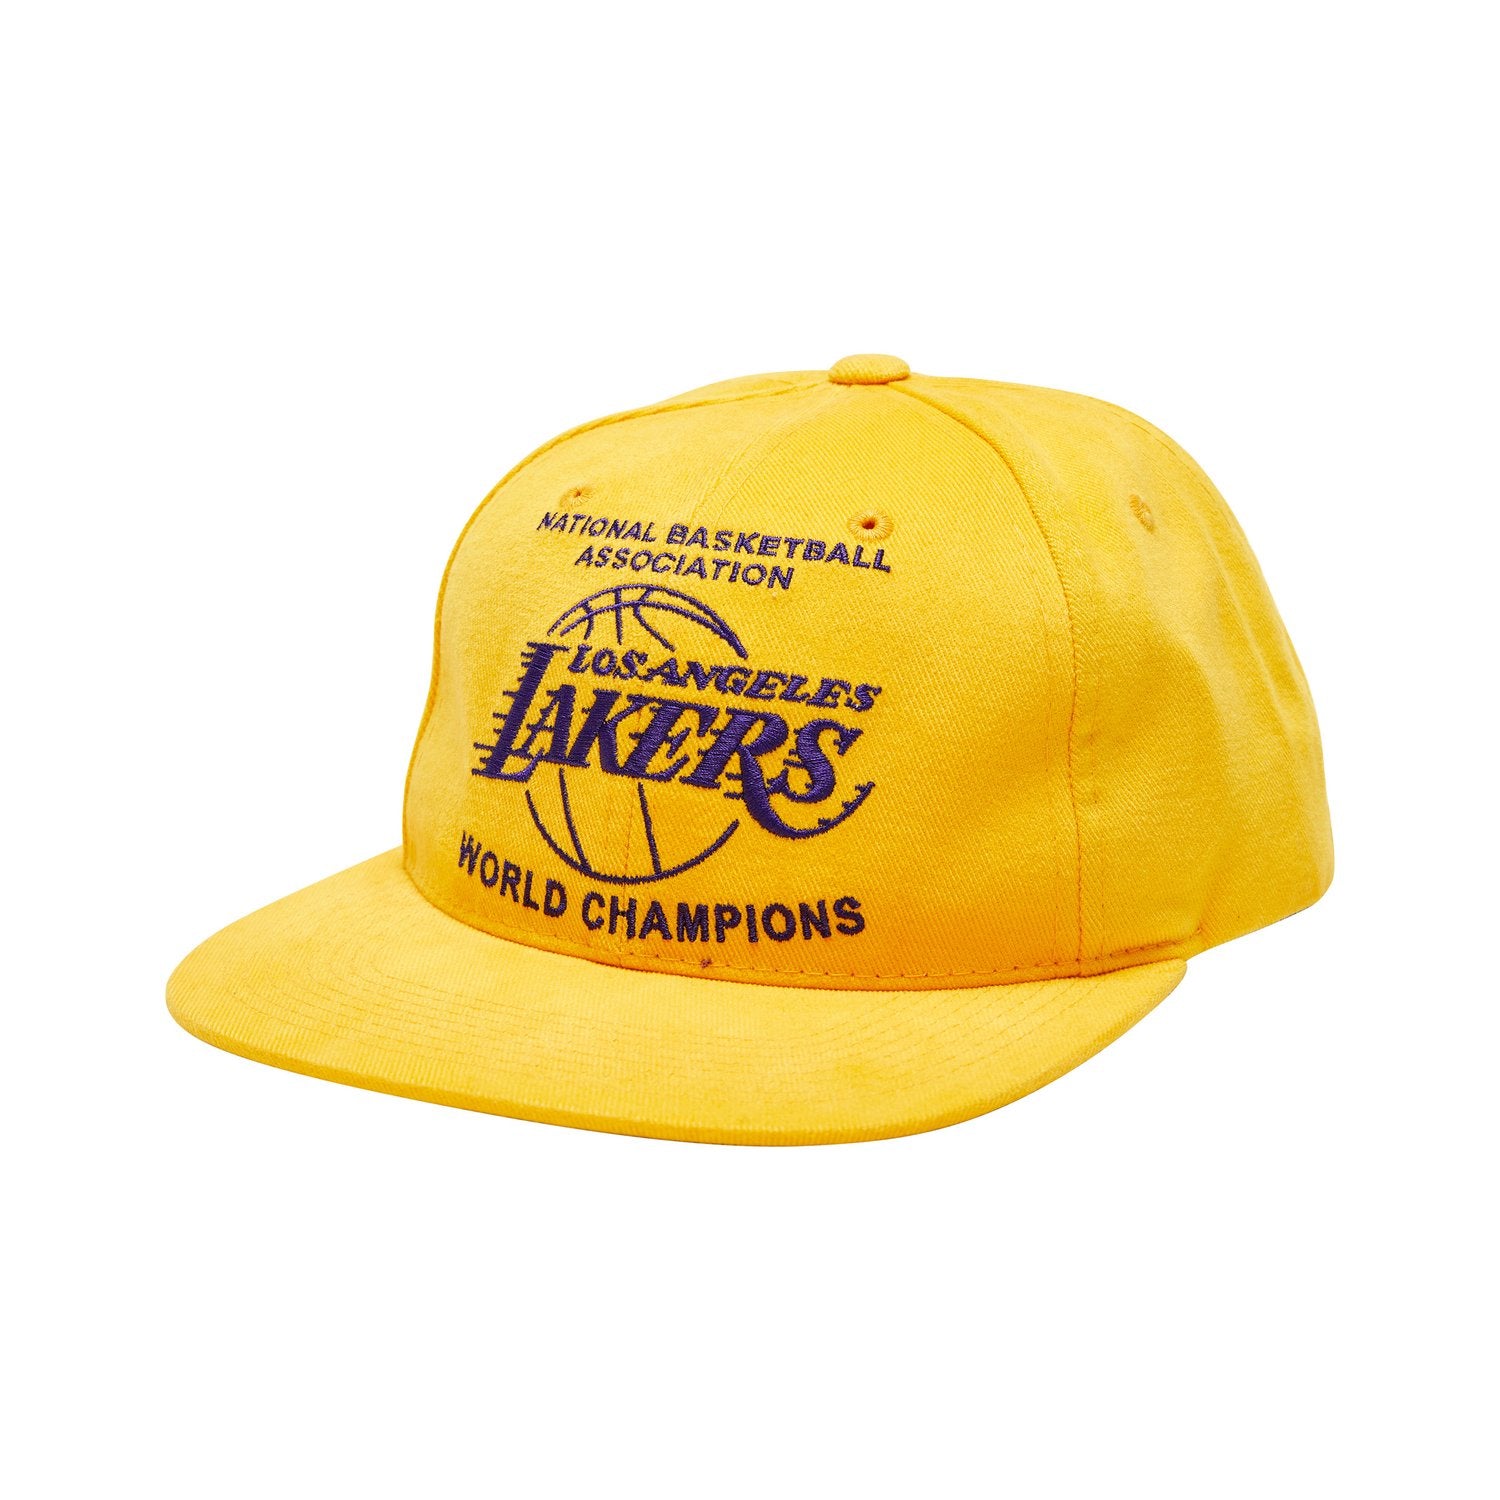 MITCHELL & NESS L.A LAKERS CHAMPIONS DEADSTOCK SNAPBACK WORLD CHAMPIONS